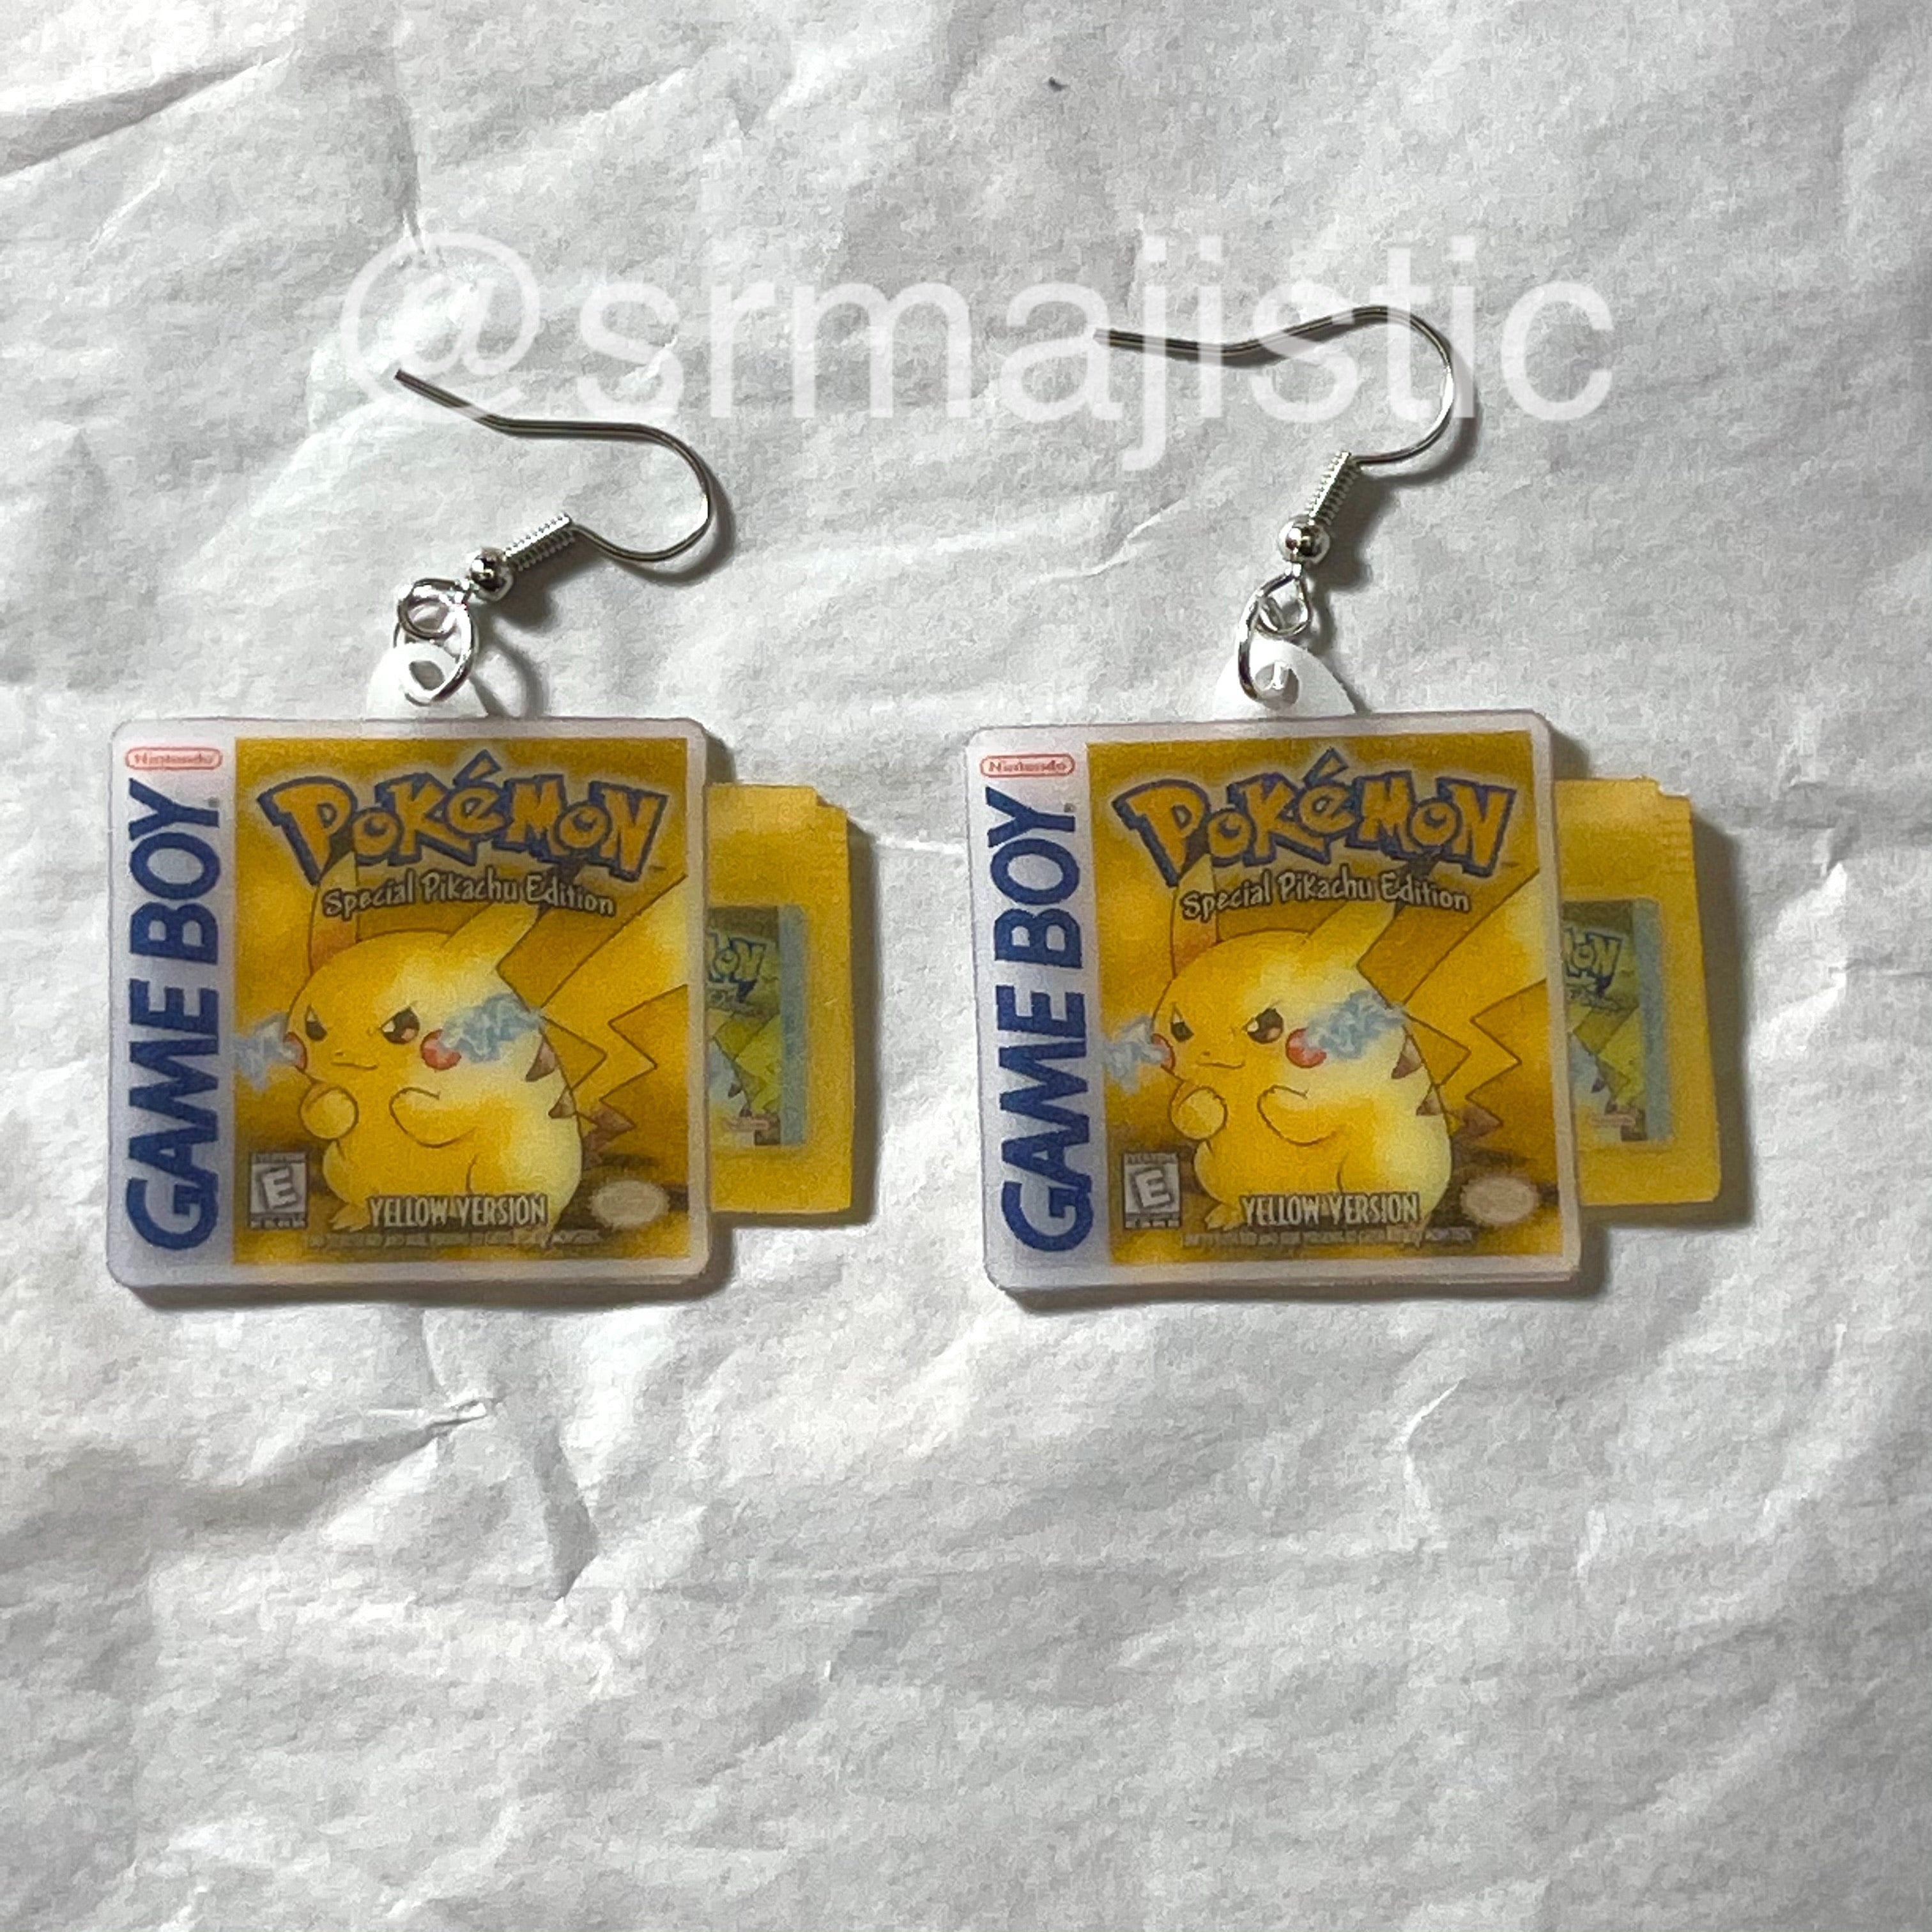 Pokémon Blue, Red, and Yellow Game Boy Game 2D detailed Handmade Earrings!